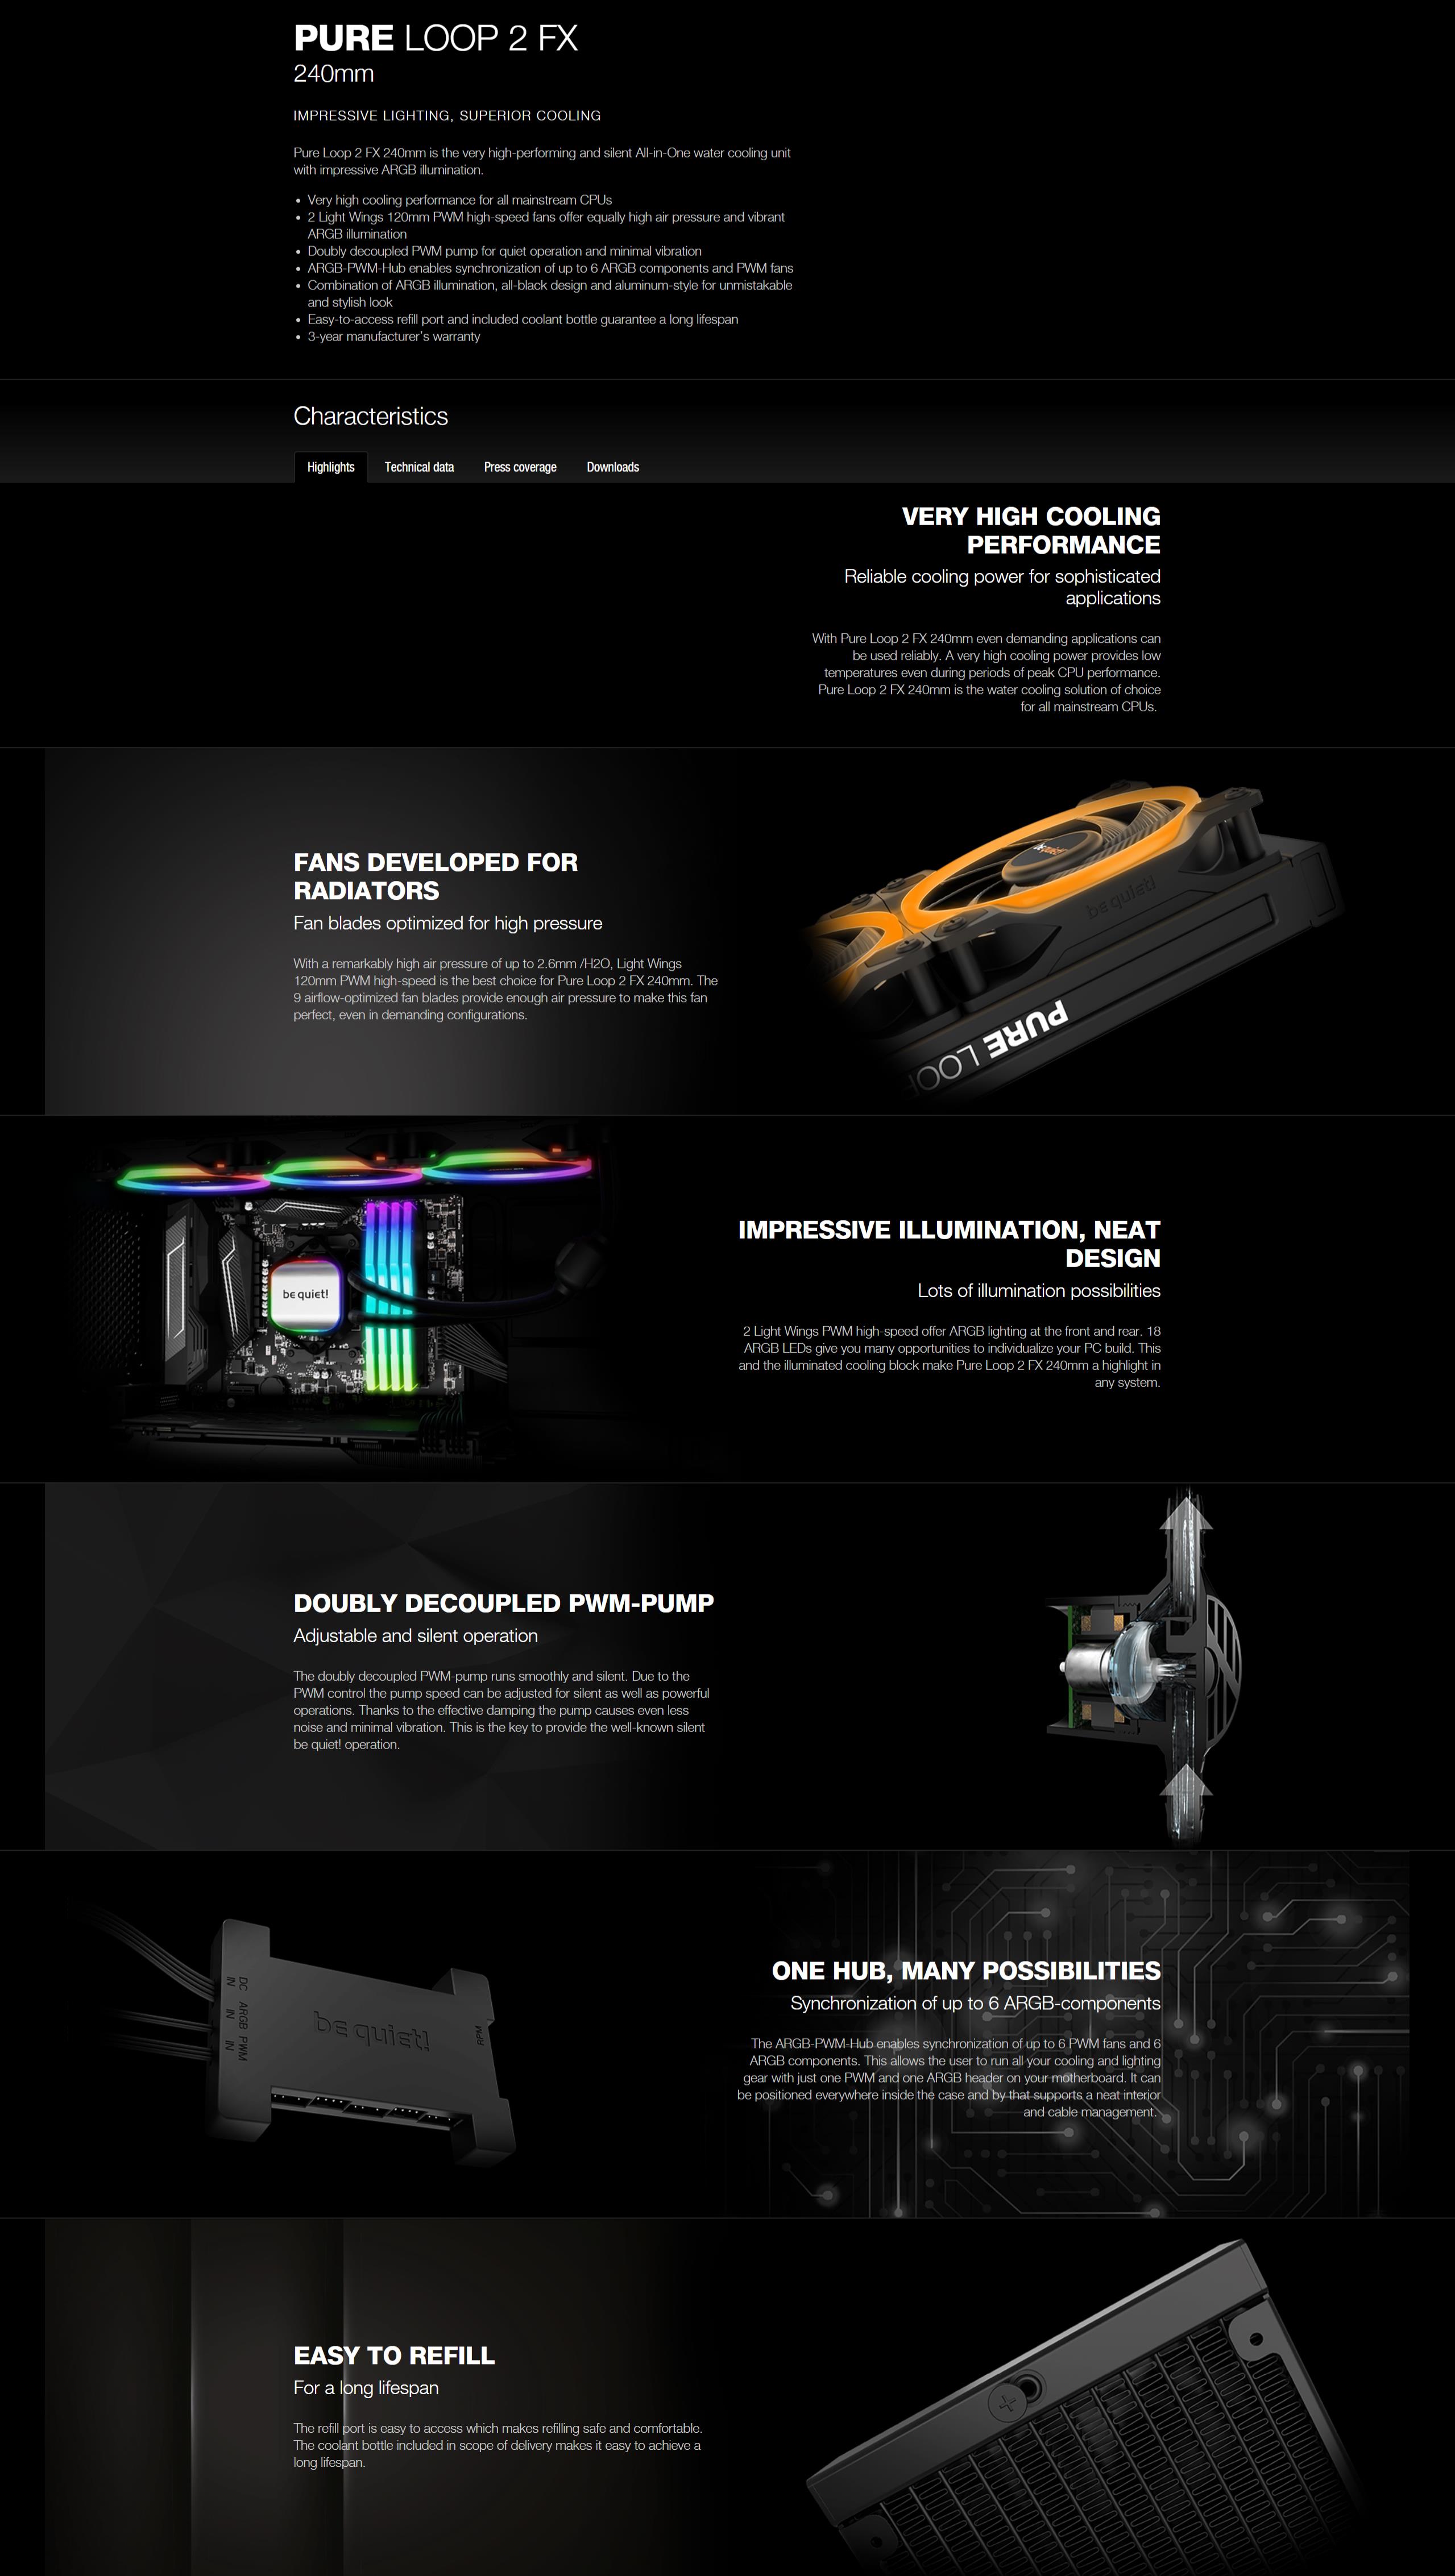 A large marketing image providing additional information about the product be quiet! Pure Loop 2 FX 240mm AIO CPU Cooler - Additional alt info not provided